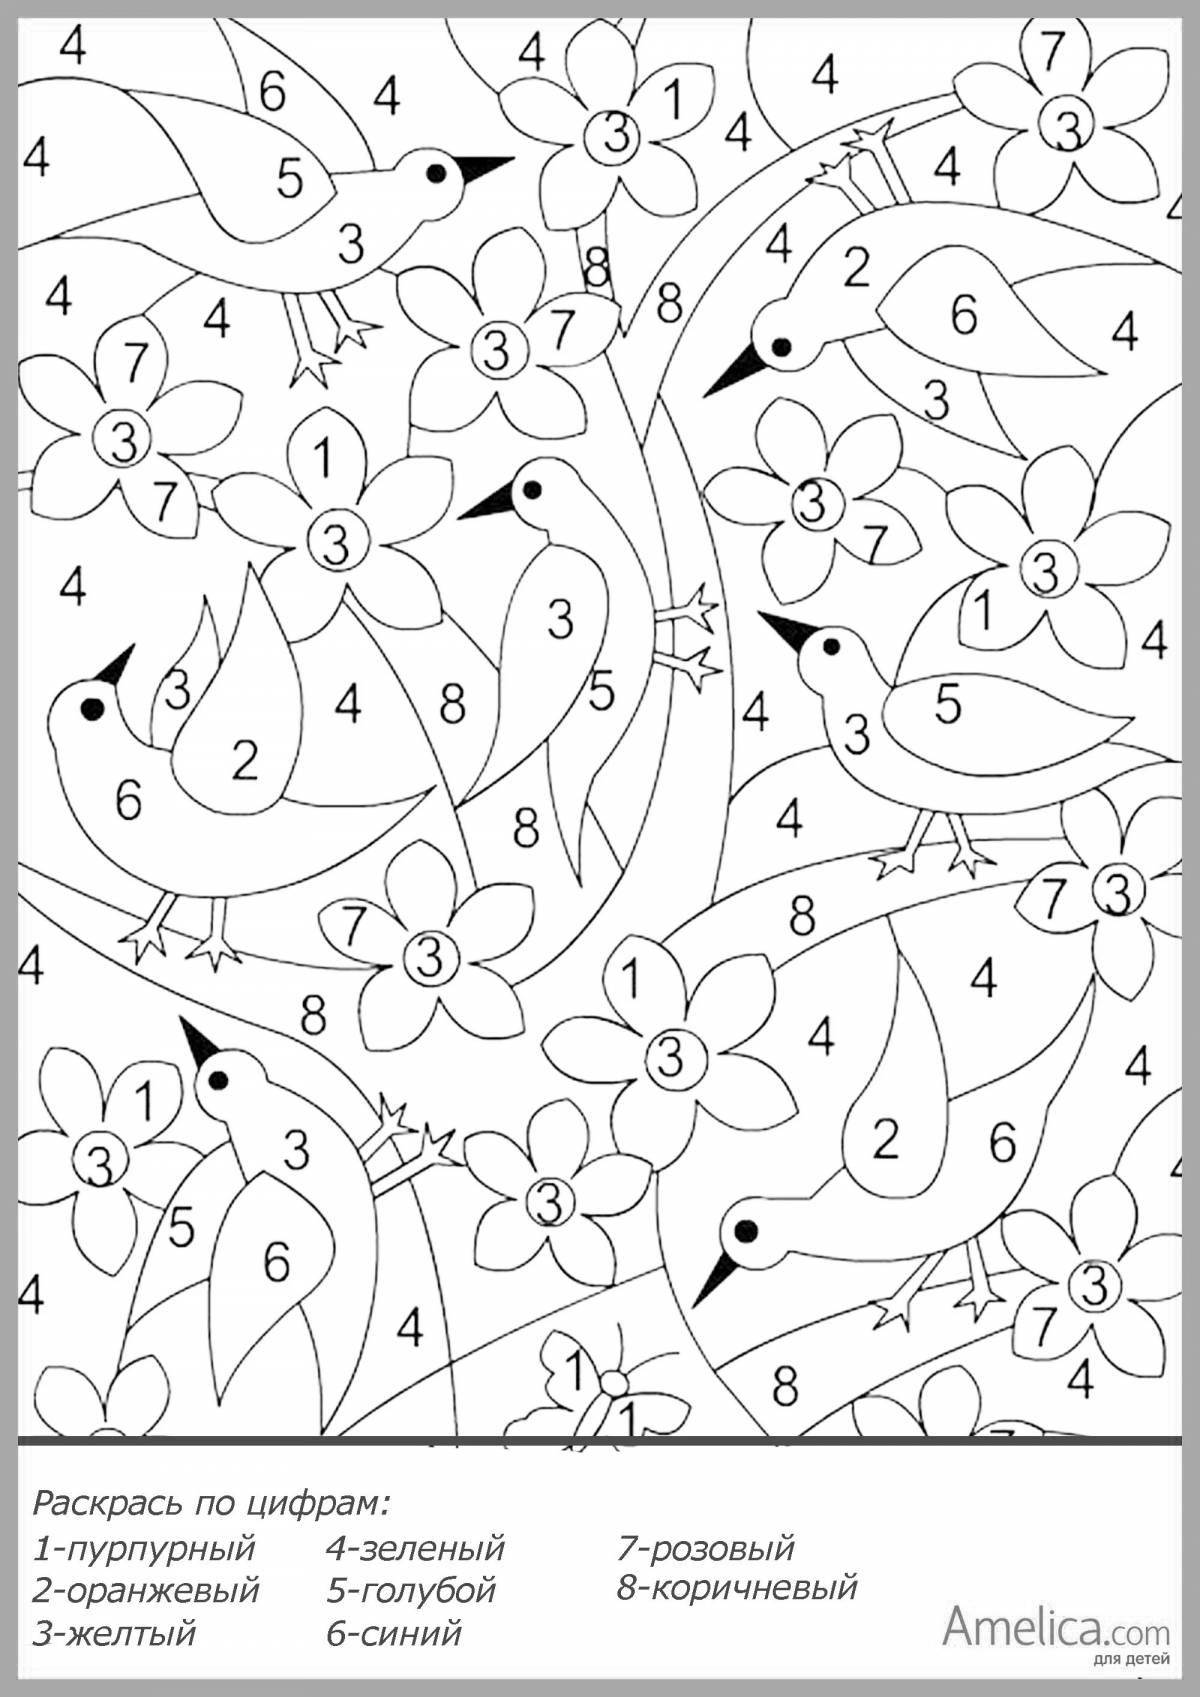 Stimulating coloring book with numbers for 5 year olds